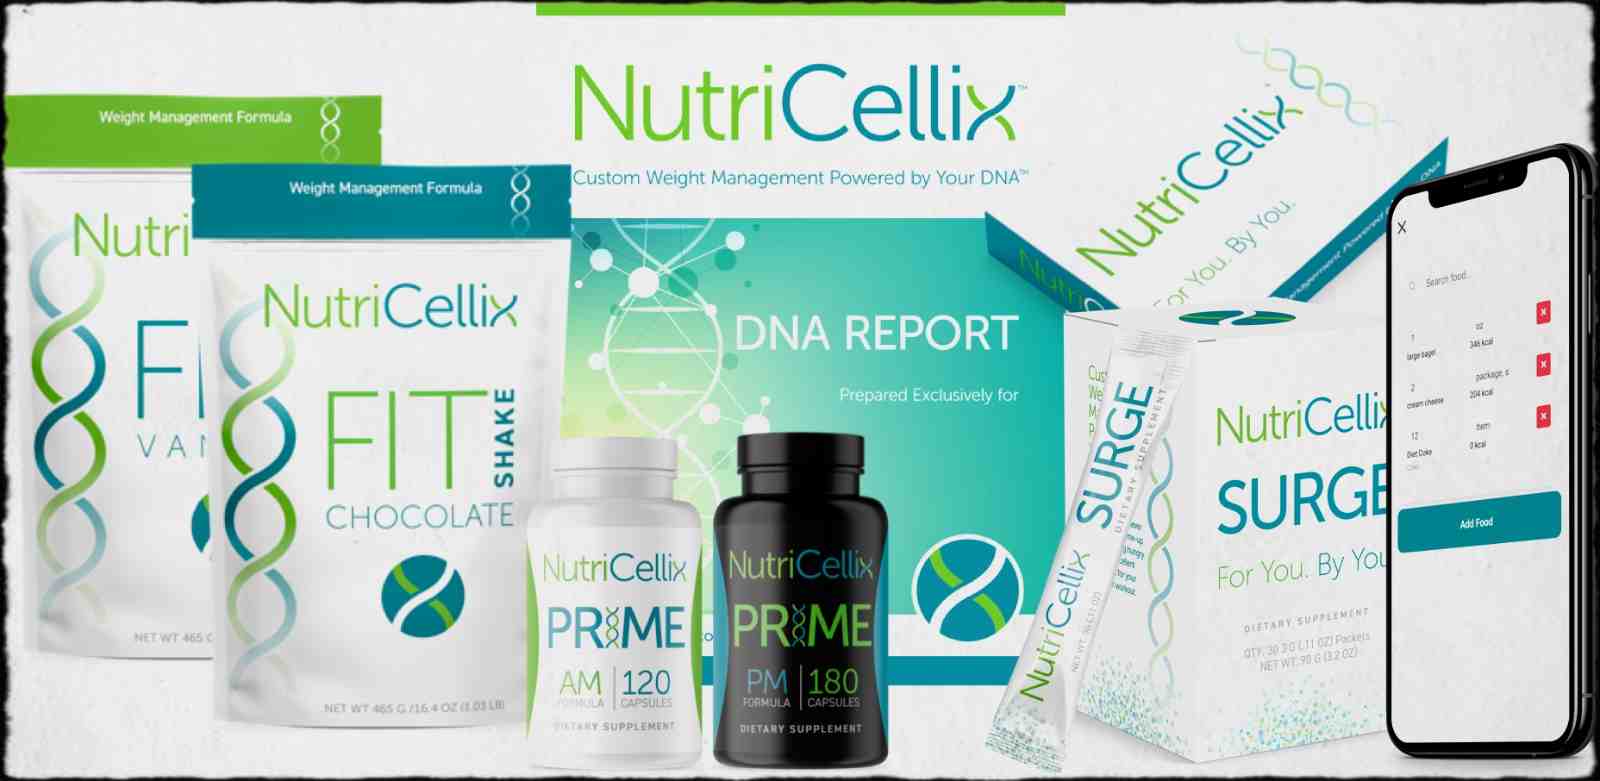 NutriCellix products 